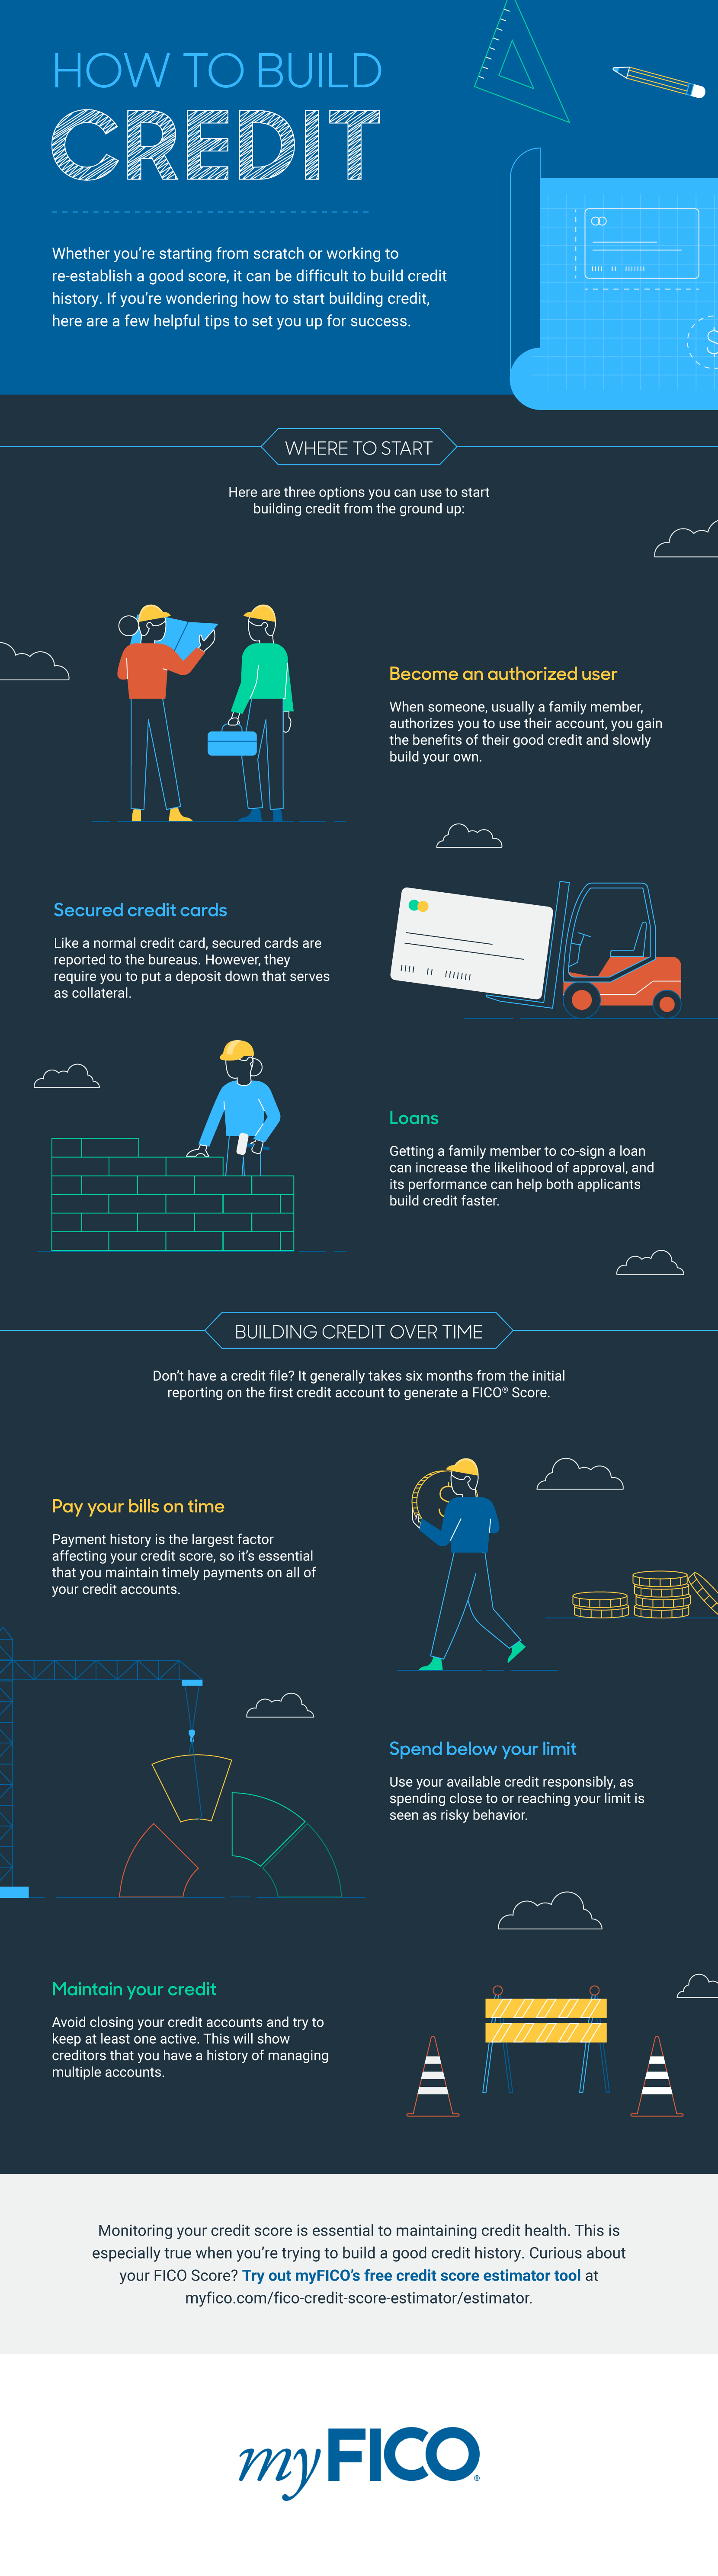 How To Build Credit Infographic | myFICO